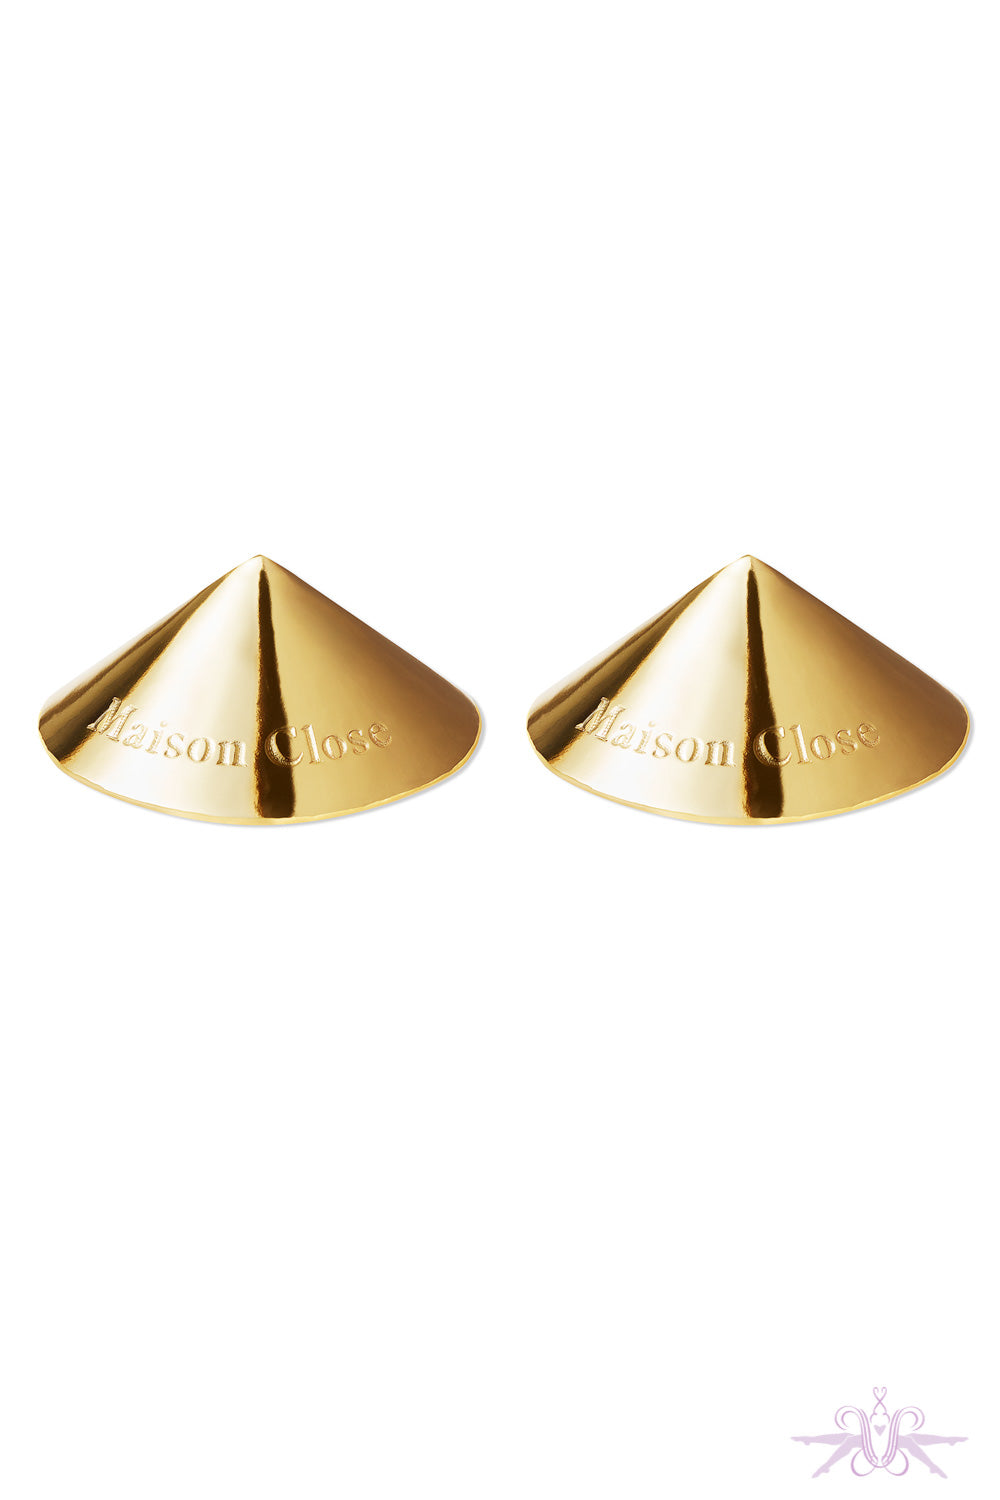 Maison Close Les Fetiches Gold Nipple Covers - Mayfair Stockings